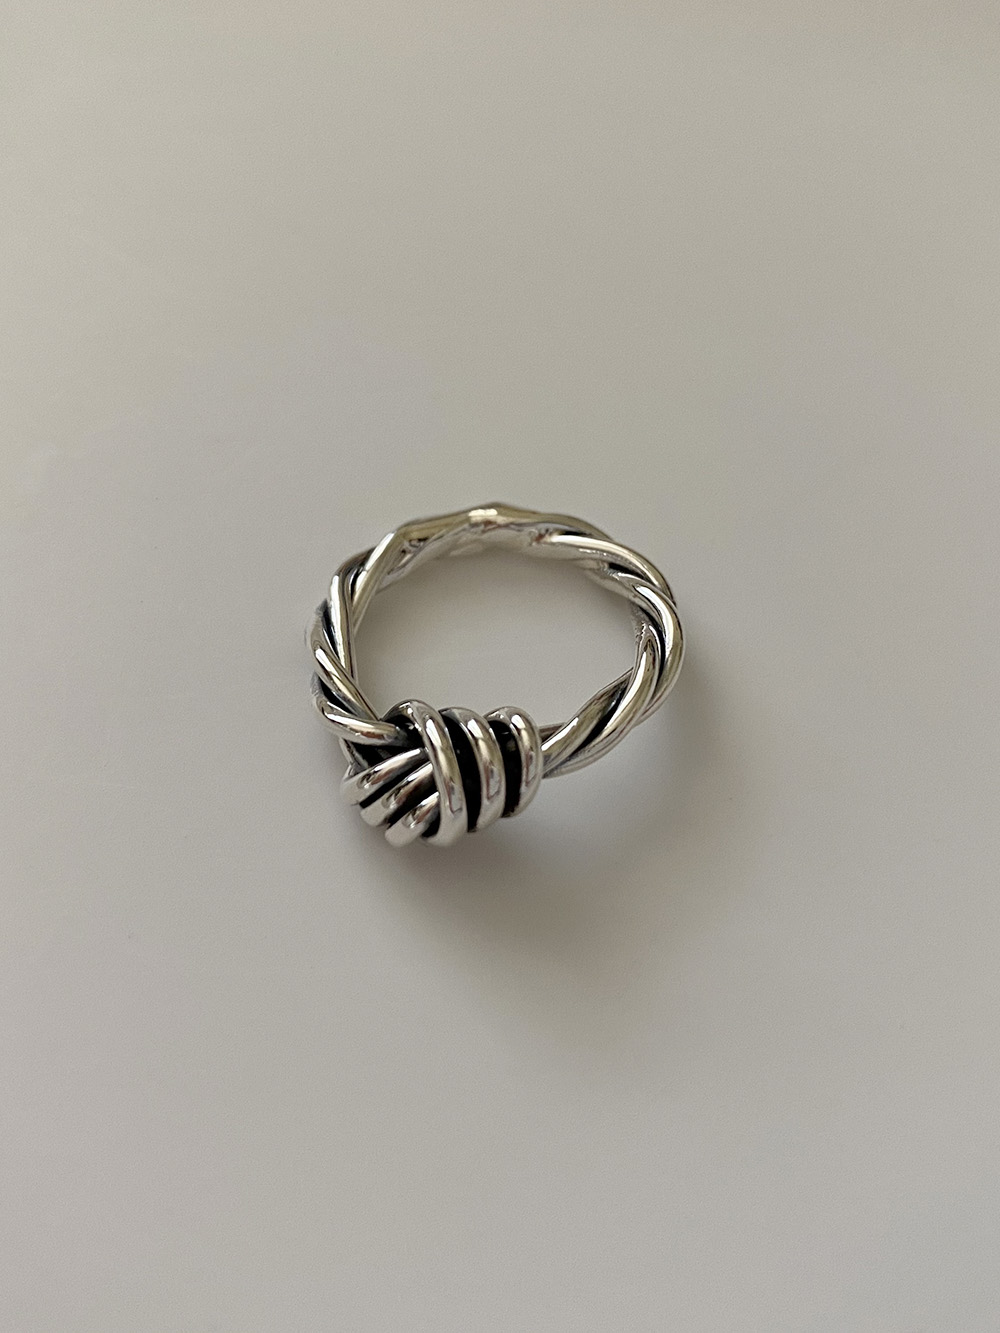 [92.5 silver] kink ring